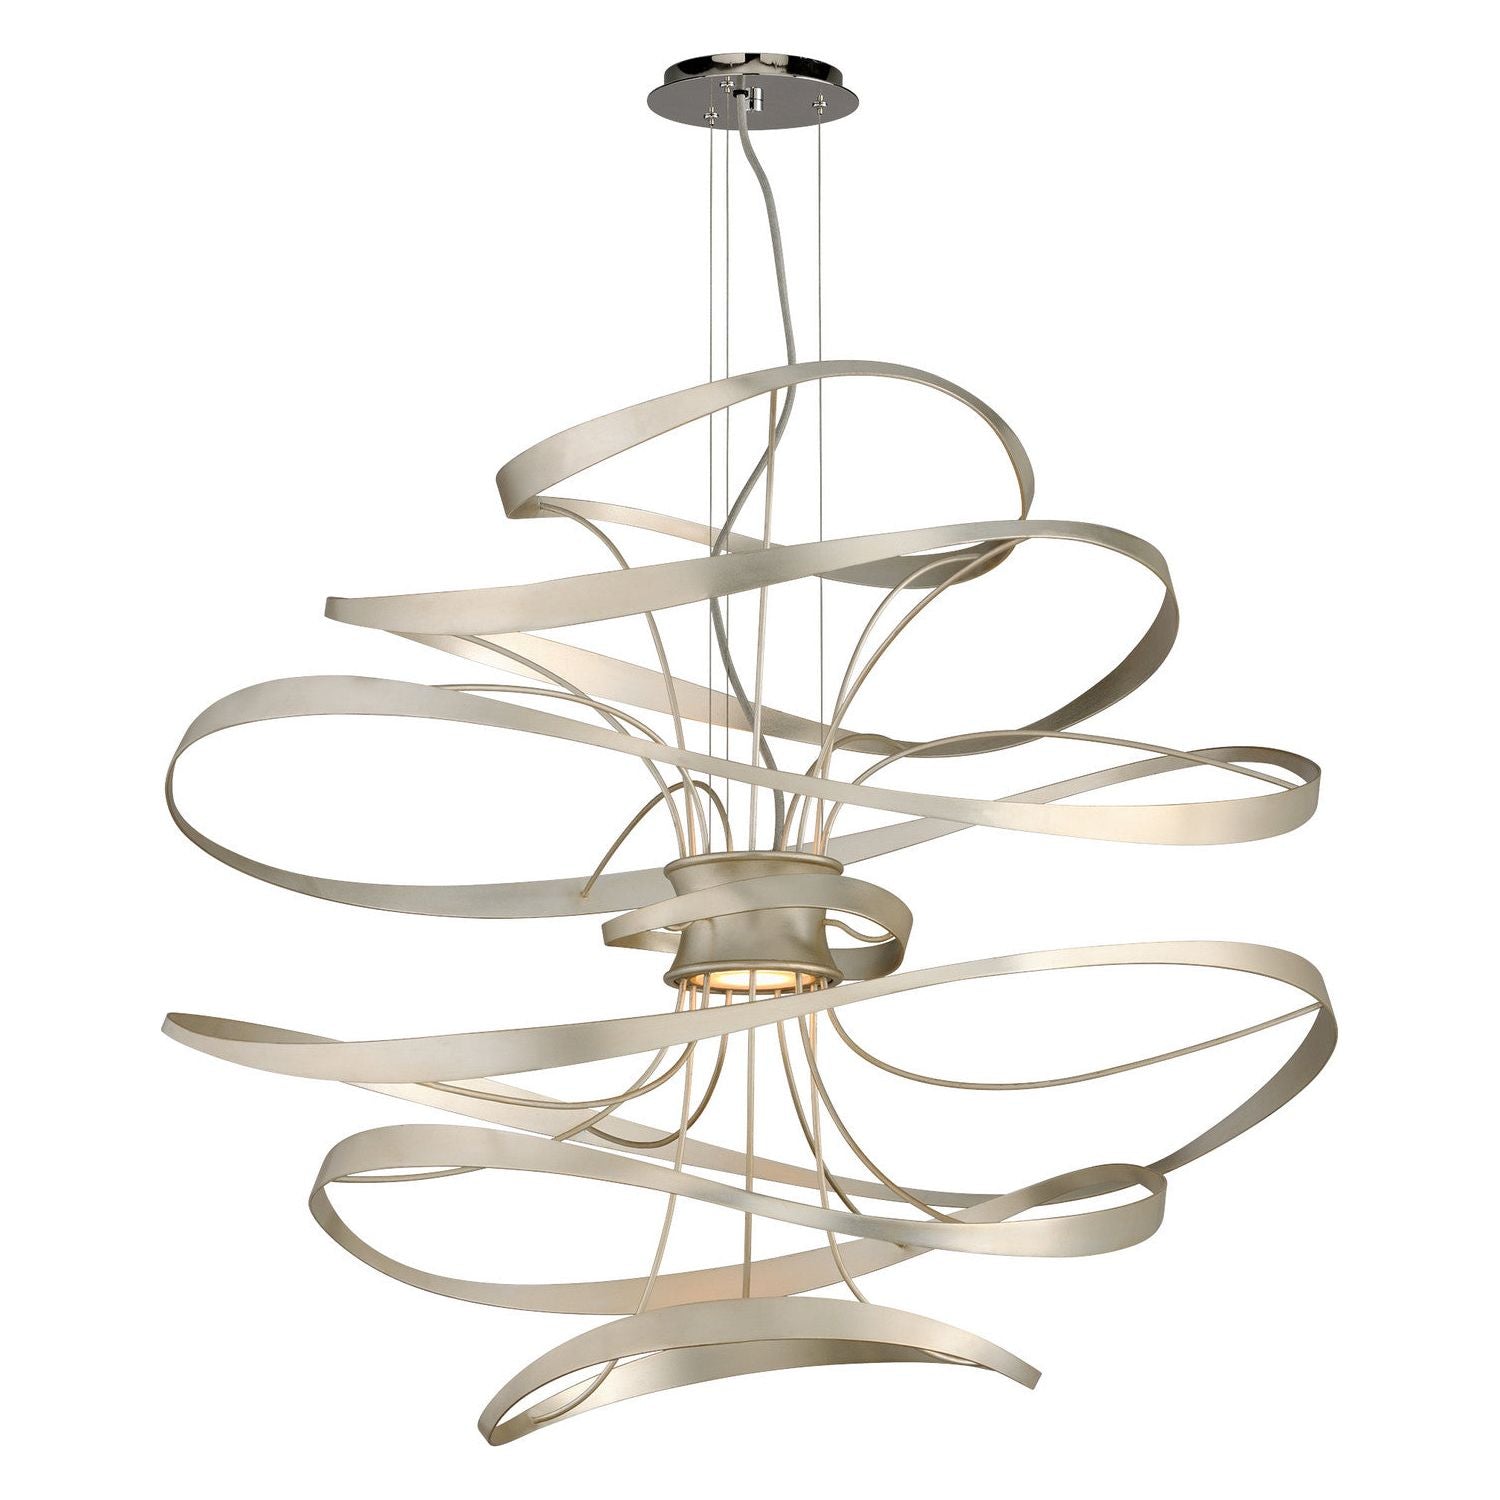 Corbett Lighting - 213-43-SL/SS - LED Chandelier - Calligraphy - Silver Leaf Polished Stainless